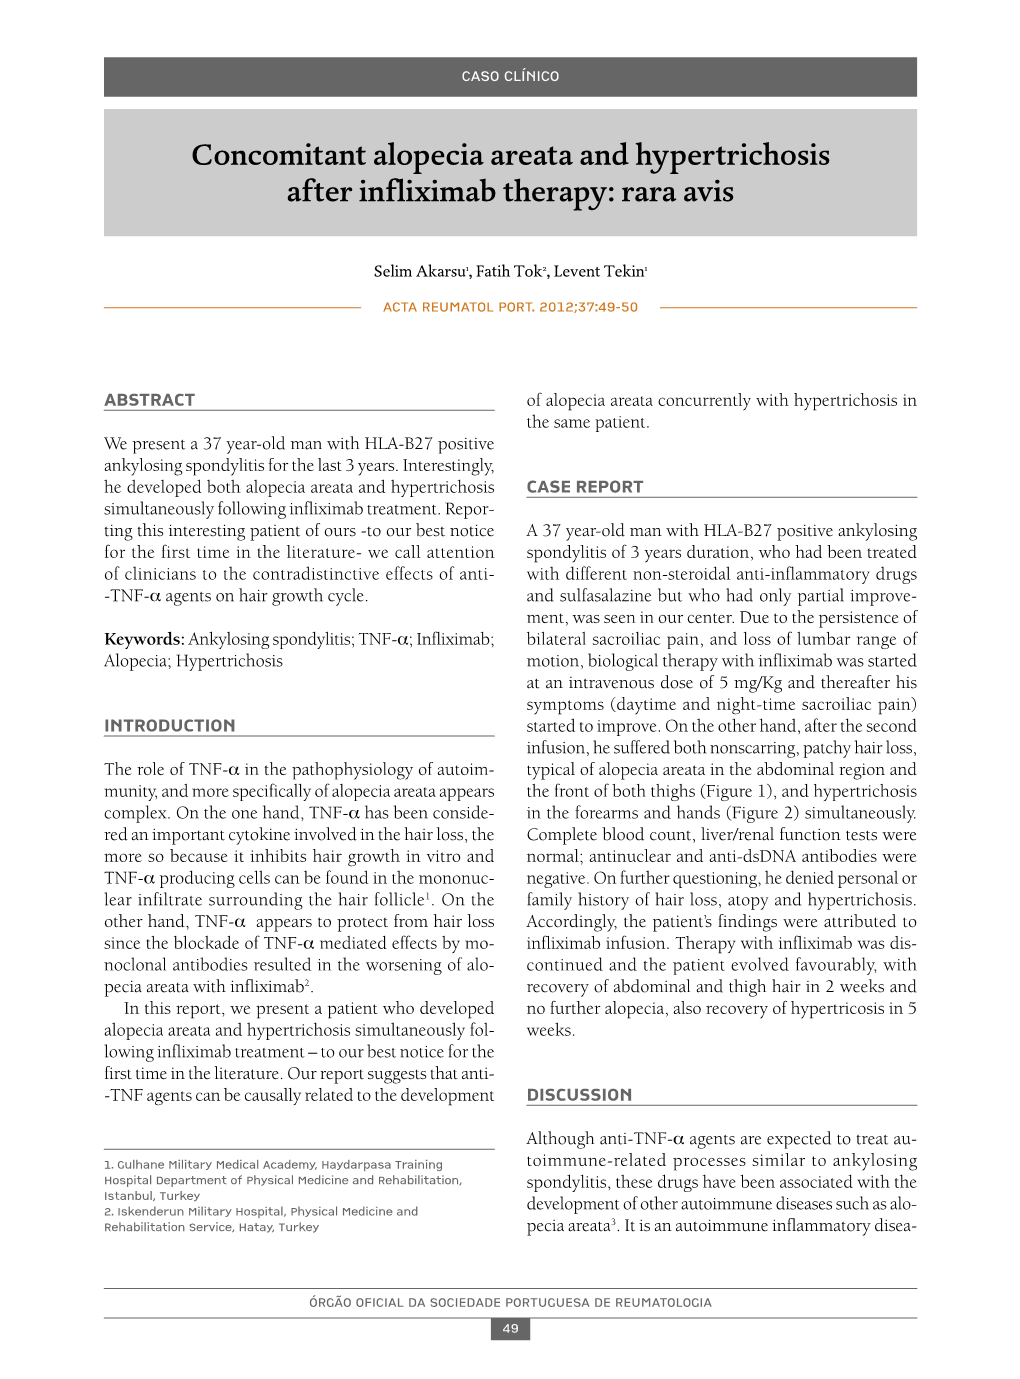 Concomitant Alopecia Areata and Hypertrichosis After Infliximab Therapy: Rara Avis